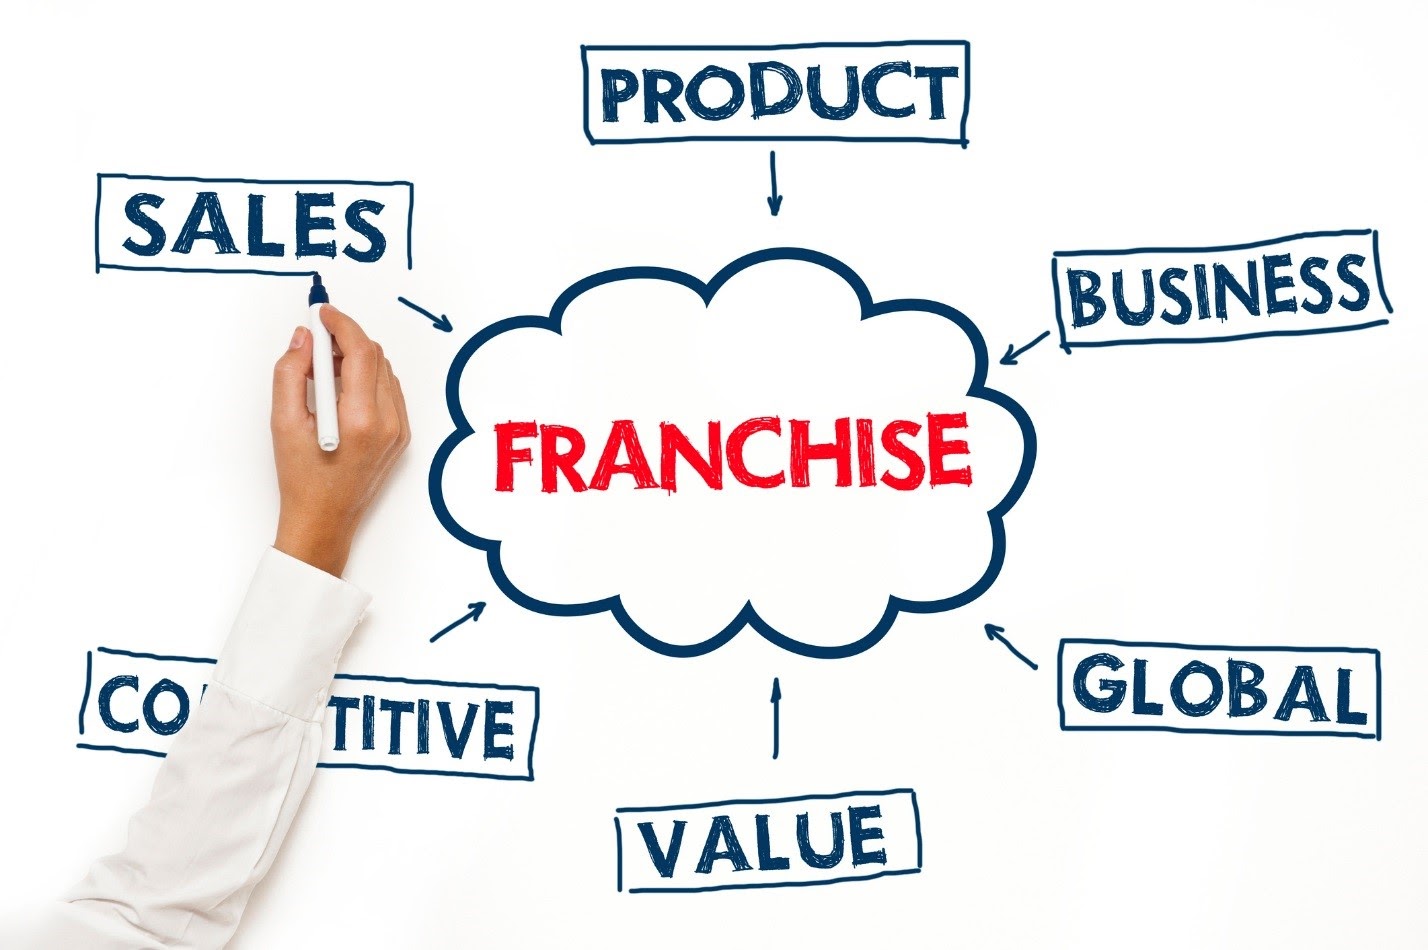 How are women causing a stir in the franchising industry